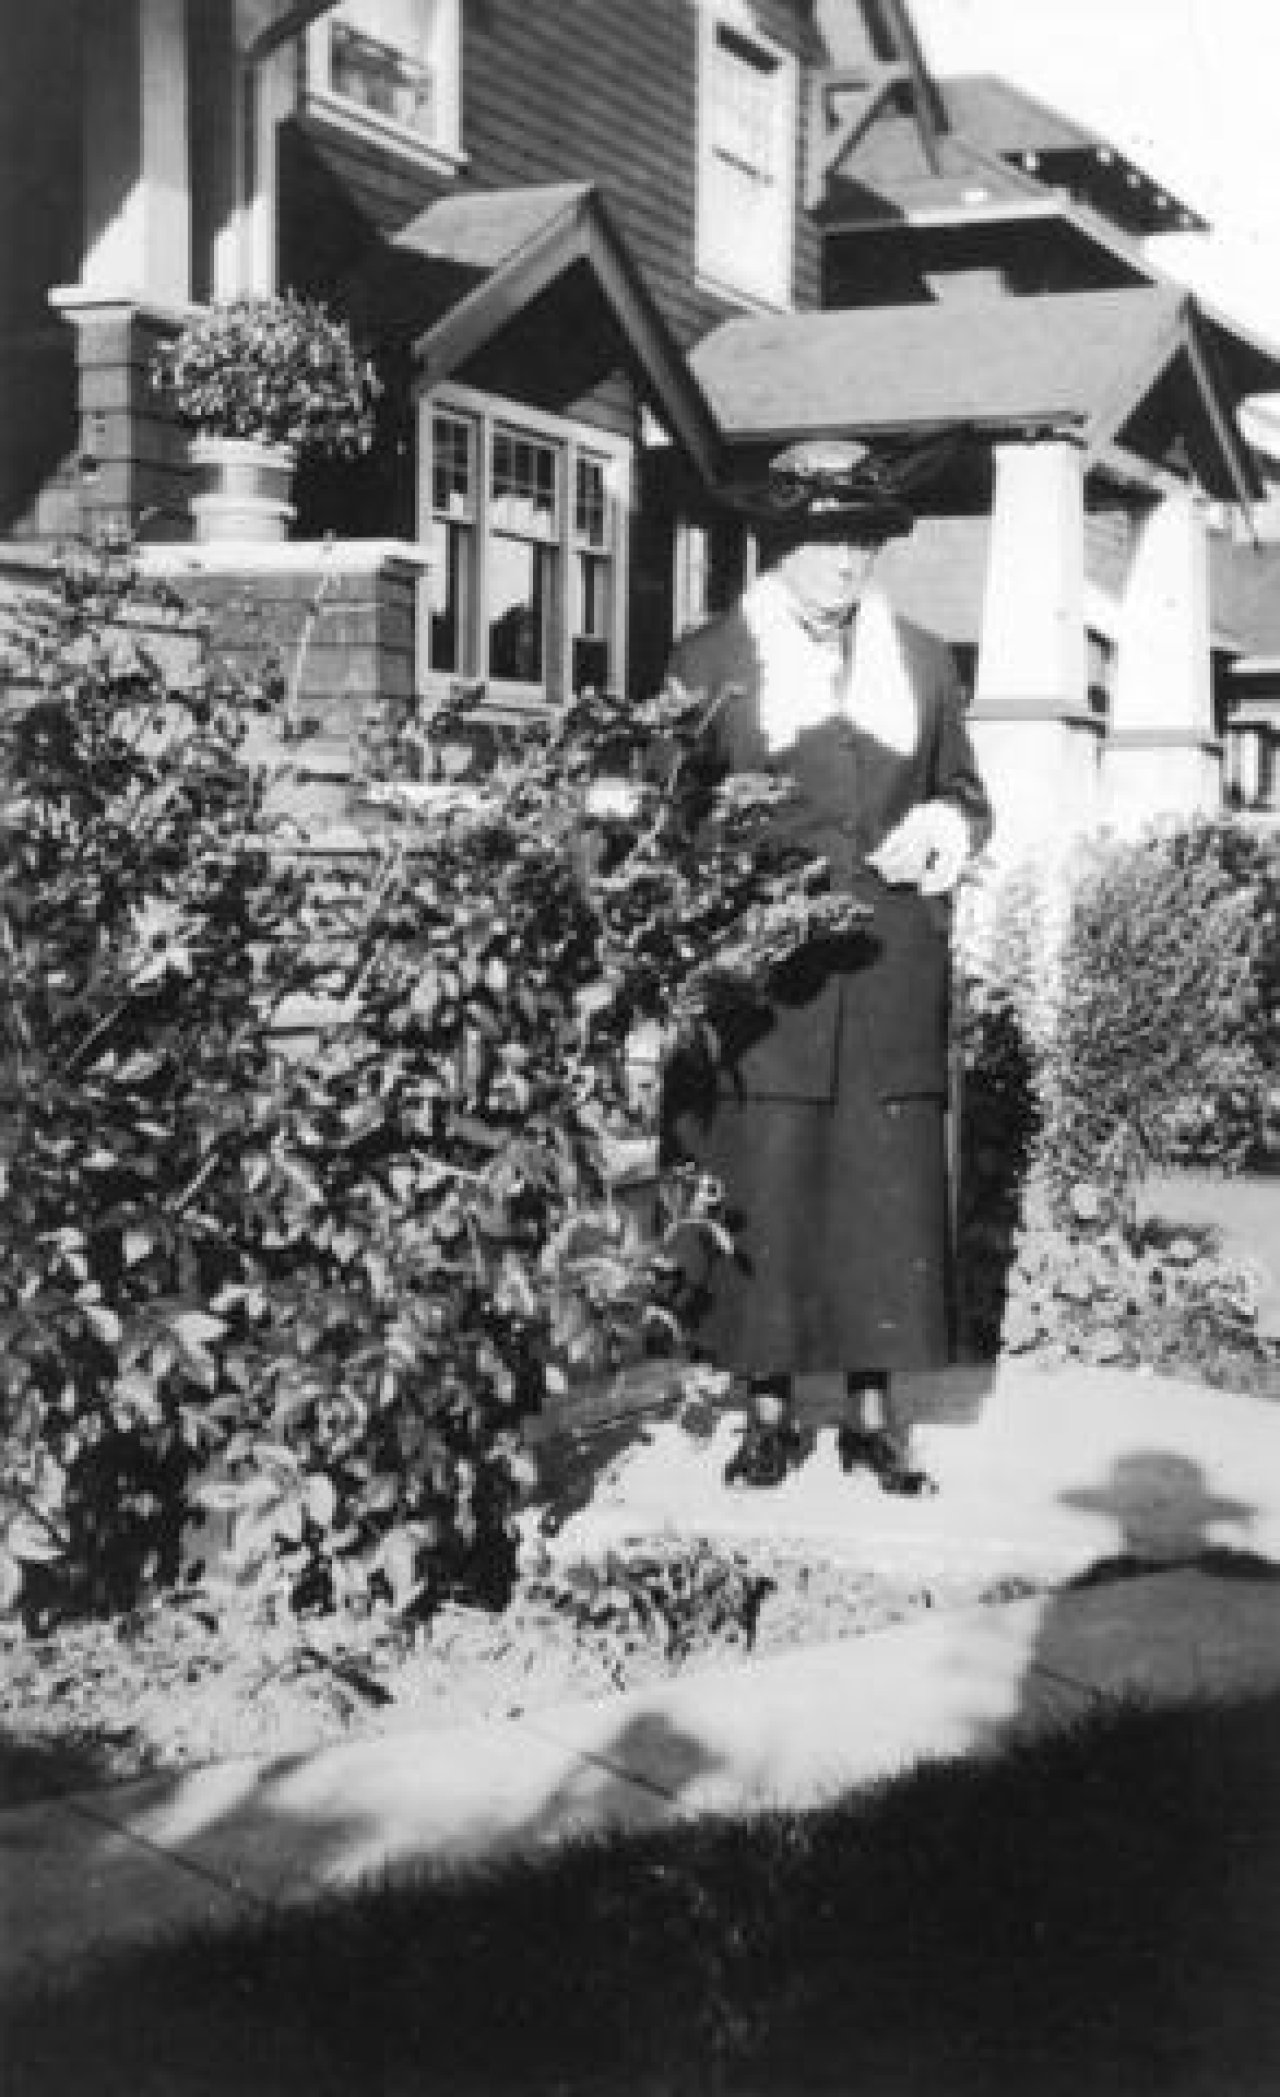 Mrs. Duncan R. Reid in front of her daughter's house at 3263 West 2nd Avenue c. 1933
Source: City of Vancouver Archives Item : Port P396.3 - [Mrs. Duncan R. Reid in front of her daughter's house at 3263 West 2nd Avenue]